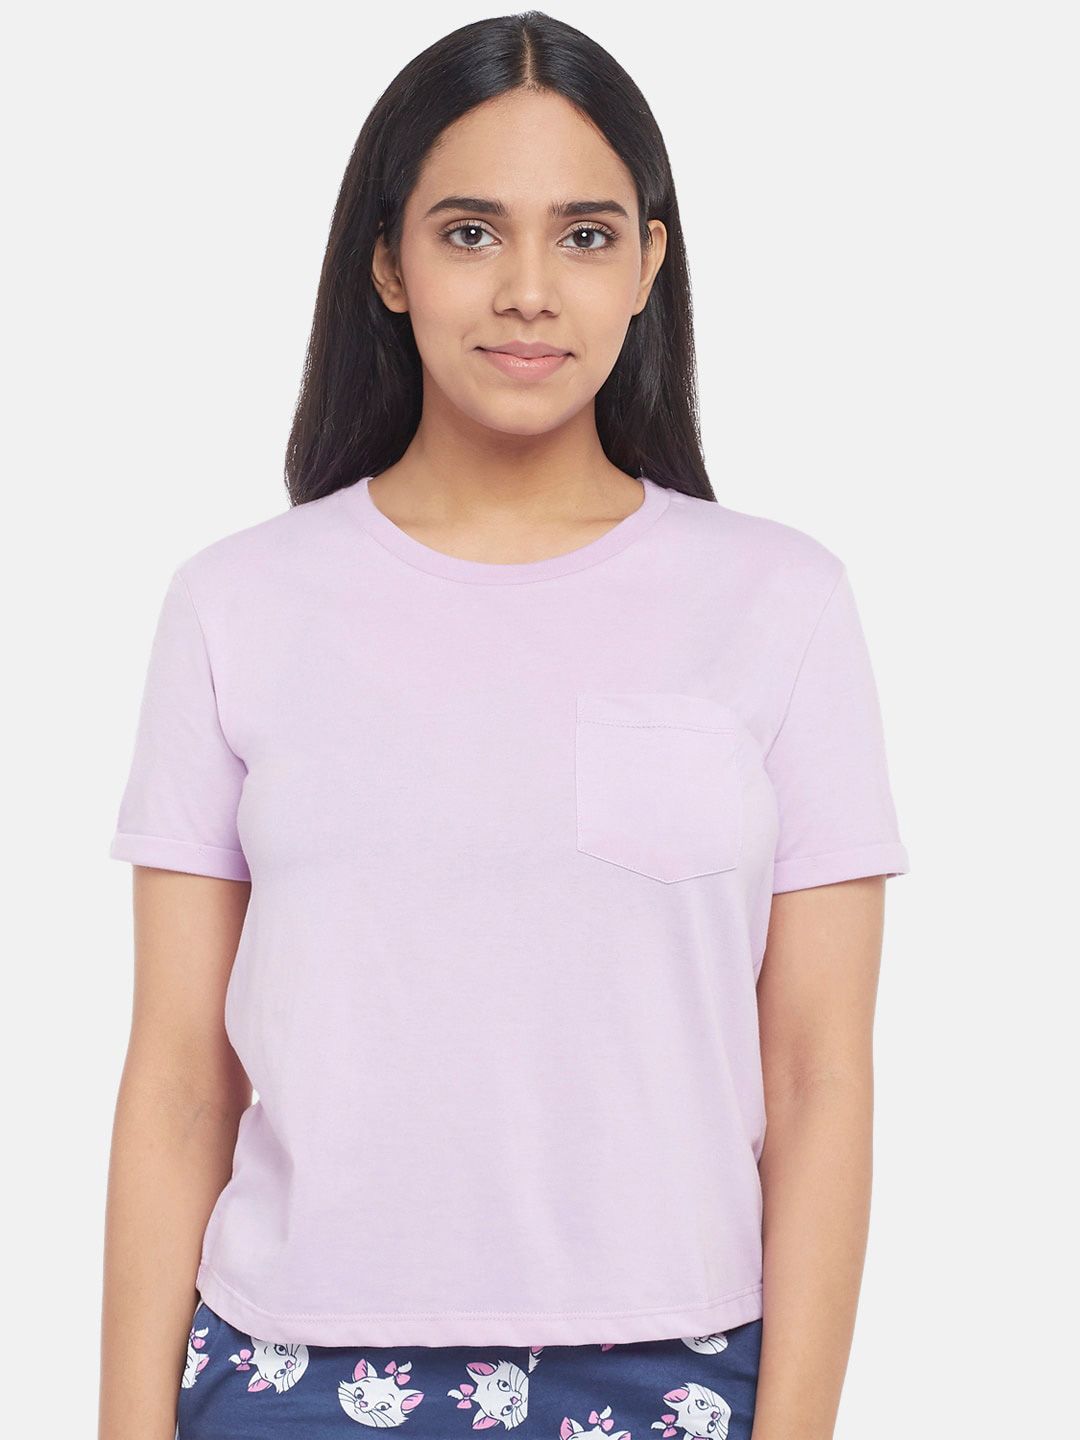 Dreamz by Pantaloons Purple Solid Regular Lounge tshirt Price in India